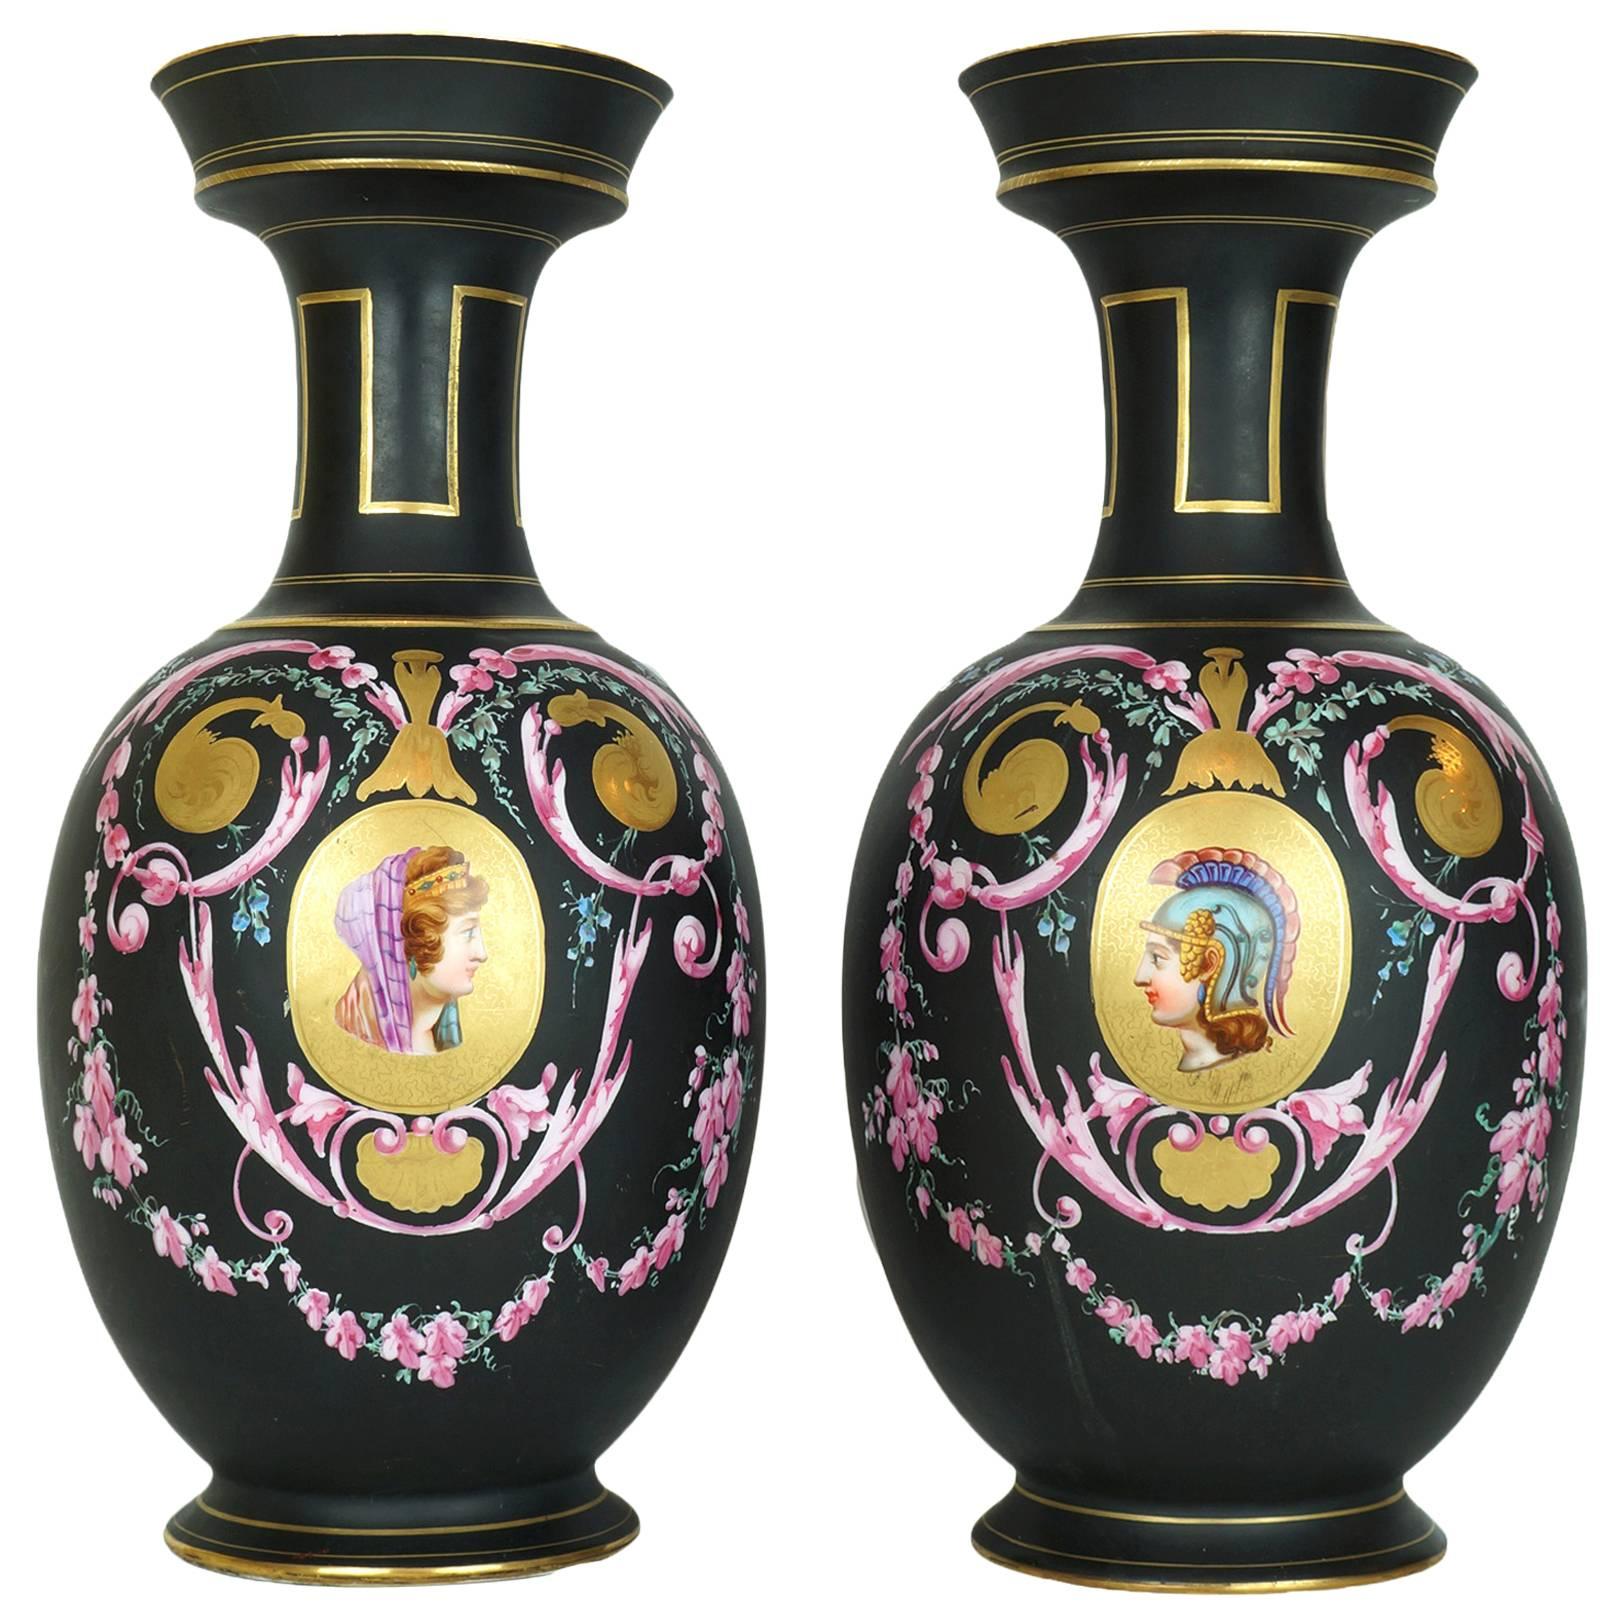 Pair of Neoclassical Porcelain Vases with Painted Portrait and Floral Decoration